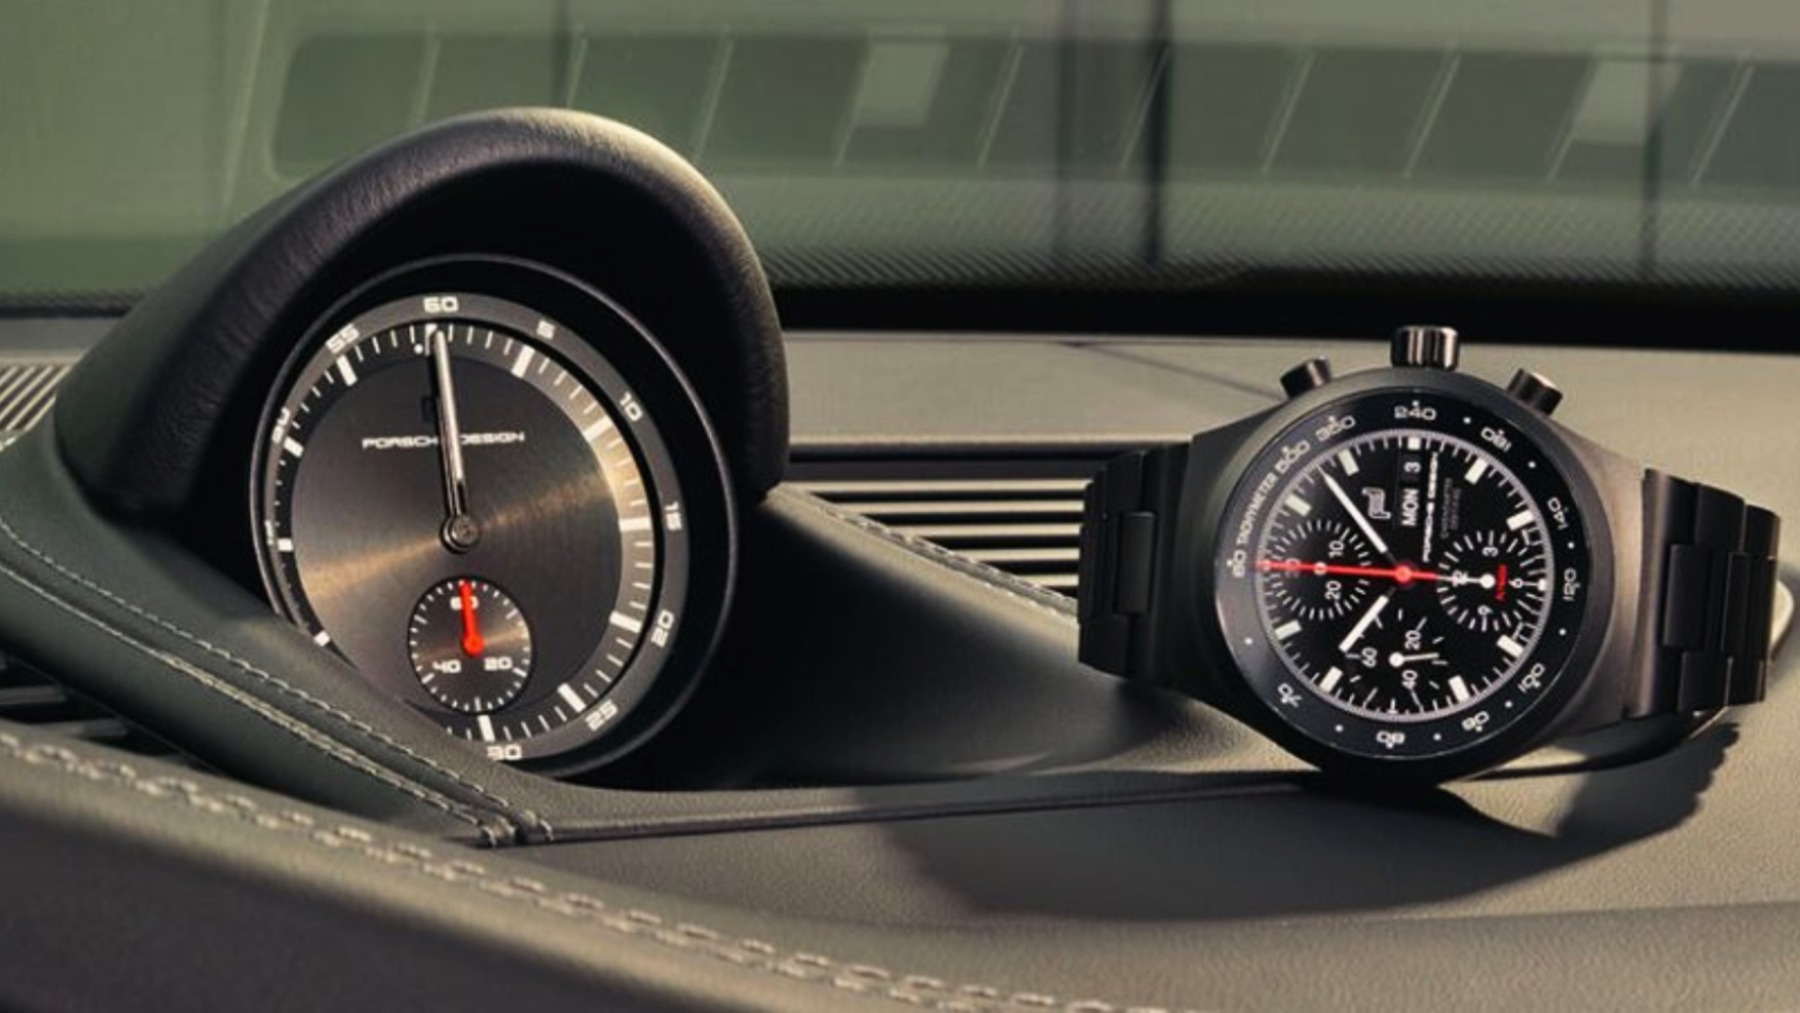 Porsche creates an exclusive watch for owners of the new 718 Spyder RS